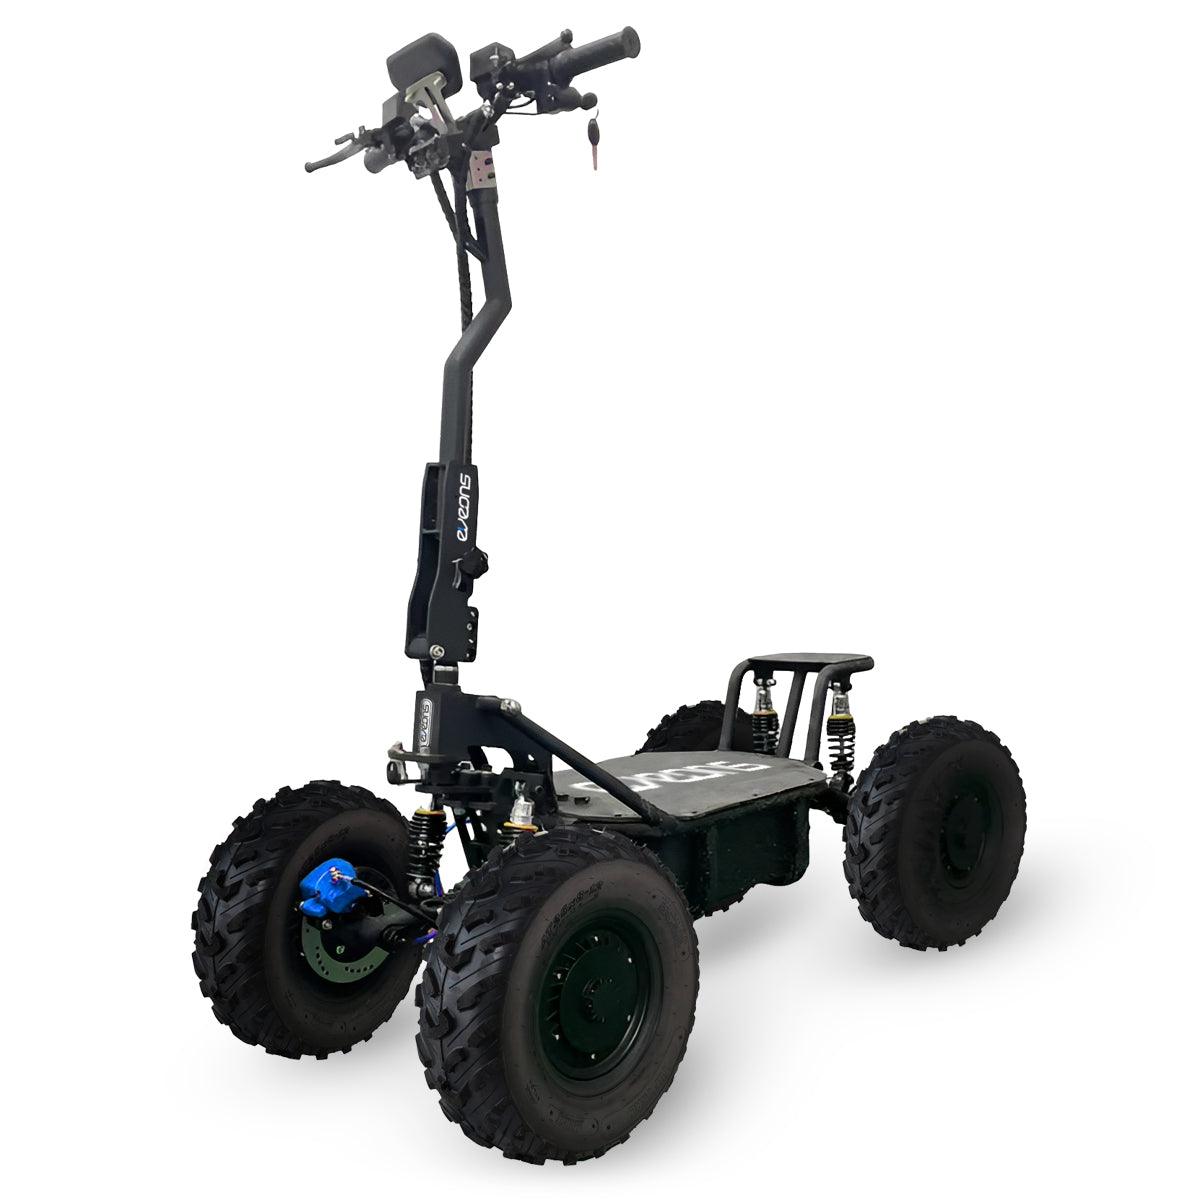 I Hercules Advanced Design, Enhanced Suspension, and Extended Capabilities - COOLBABY